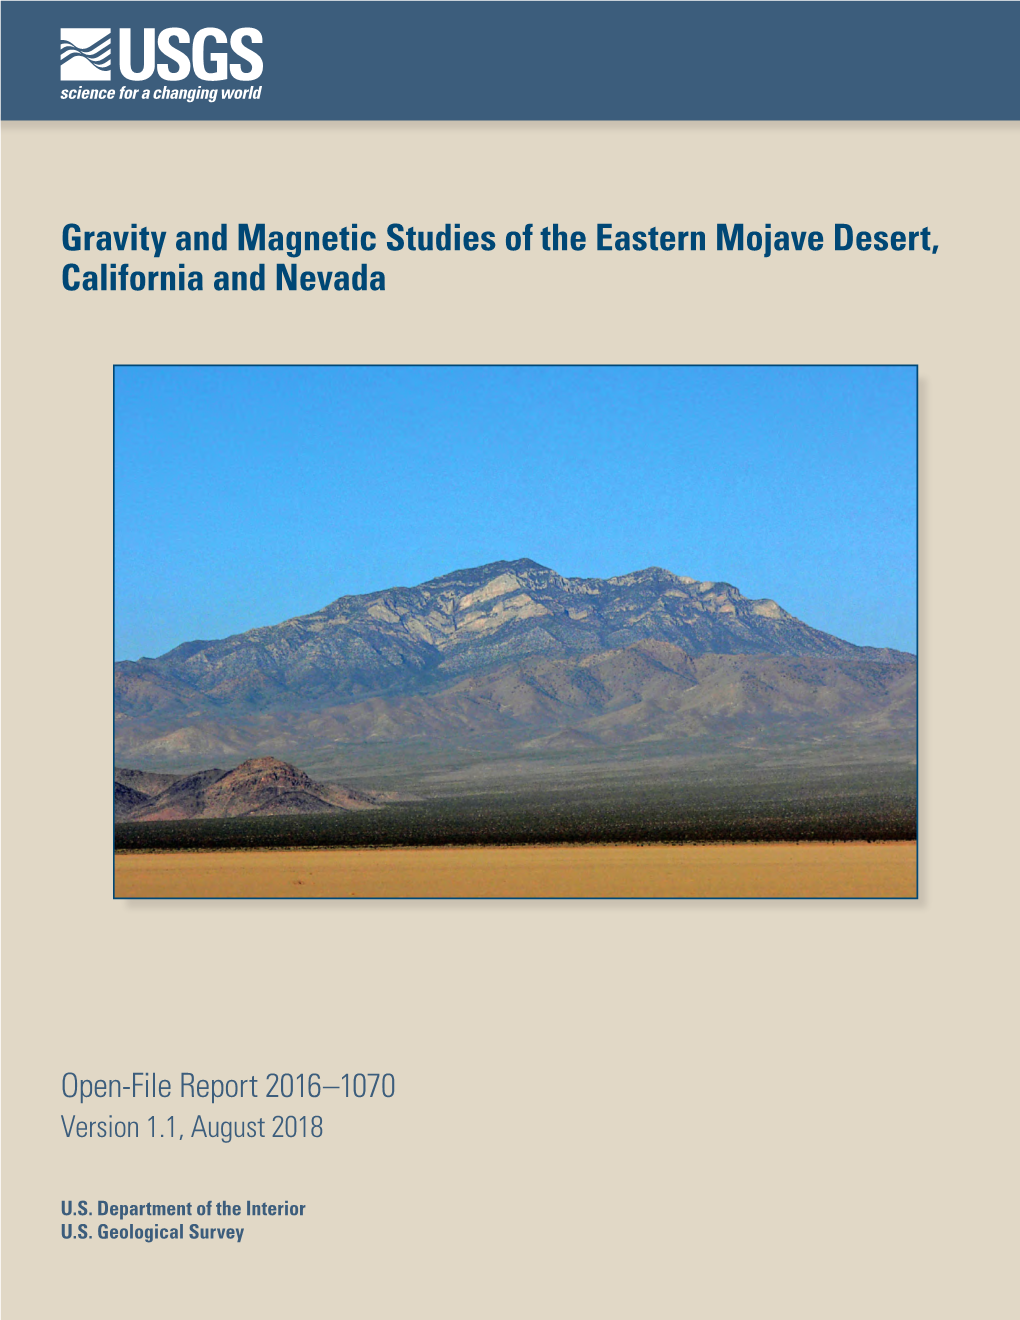 OFR 2016-1070 V1.1: Gravity and Magnetic Studies of the Eastern Mojave Desert, California and Nevada